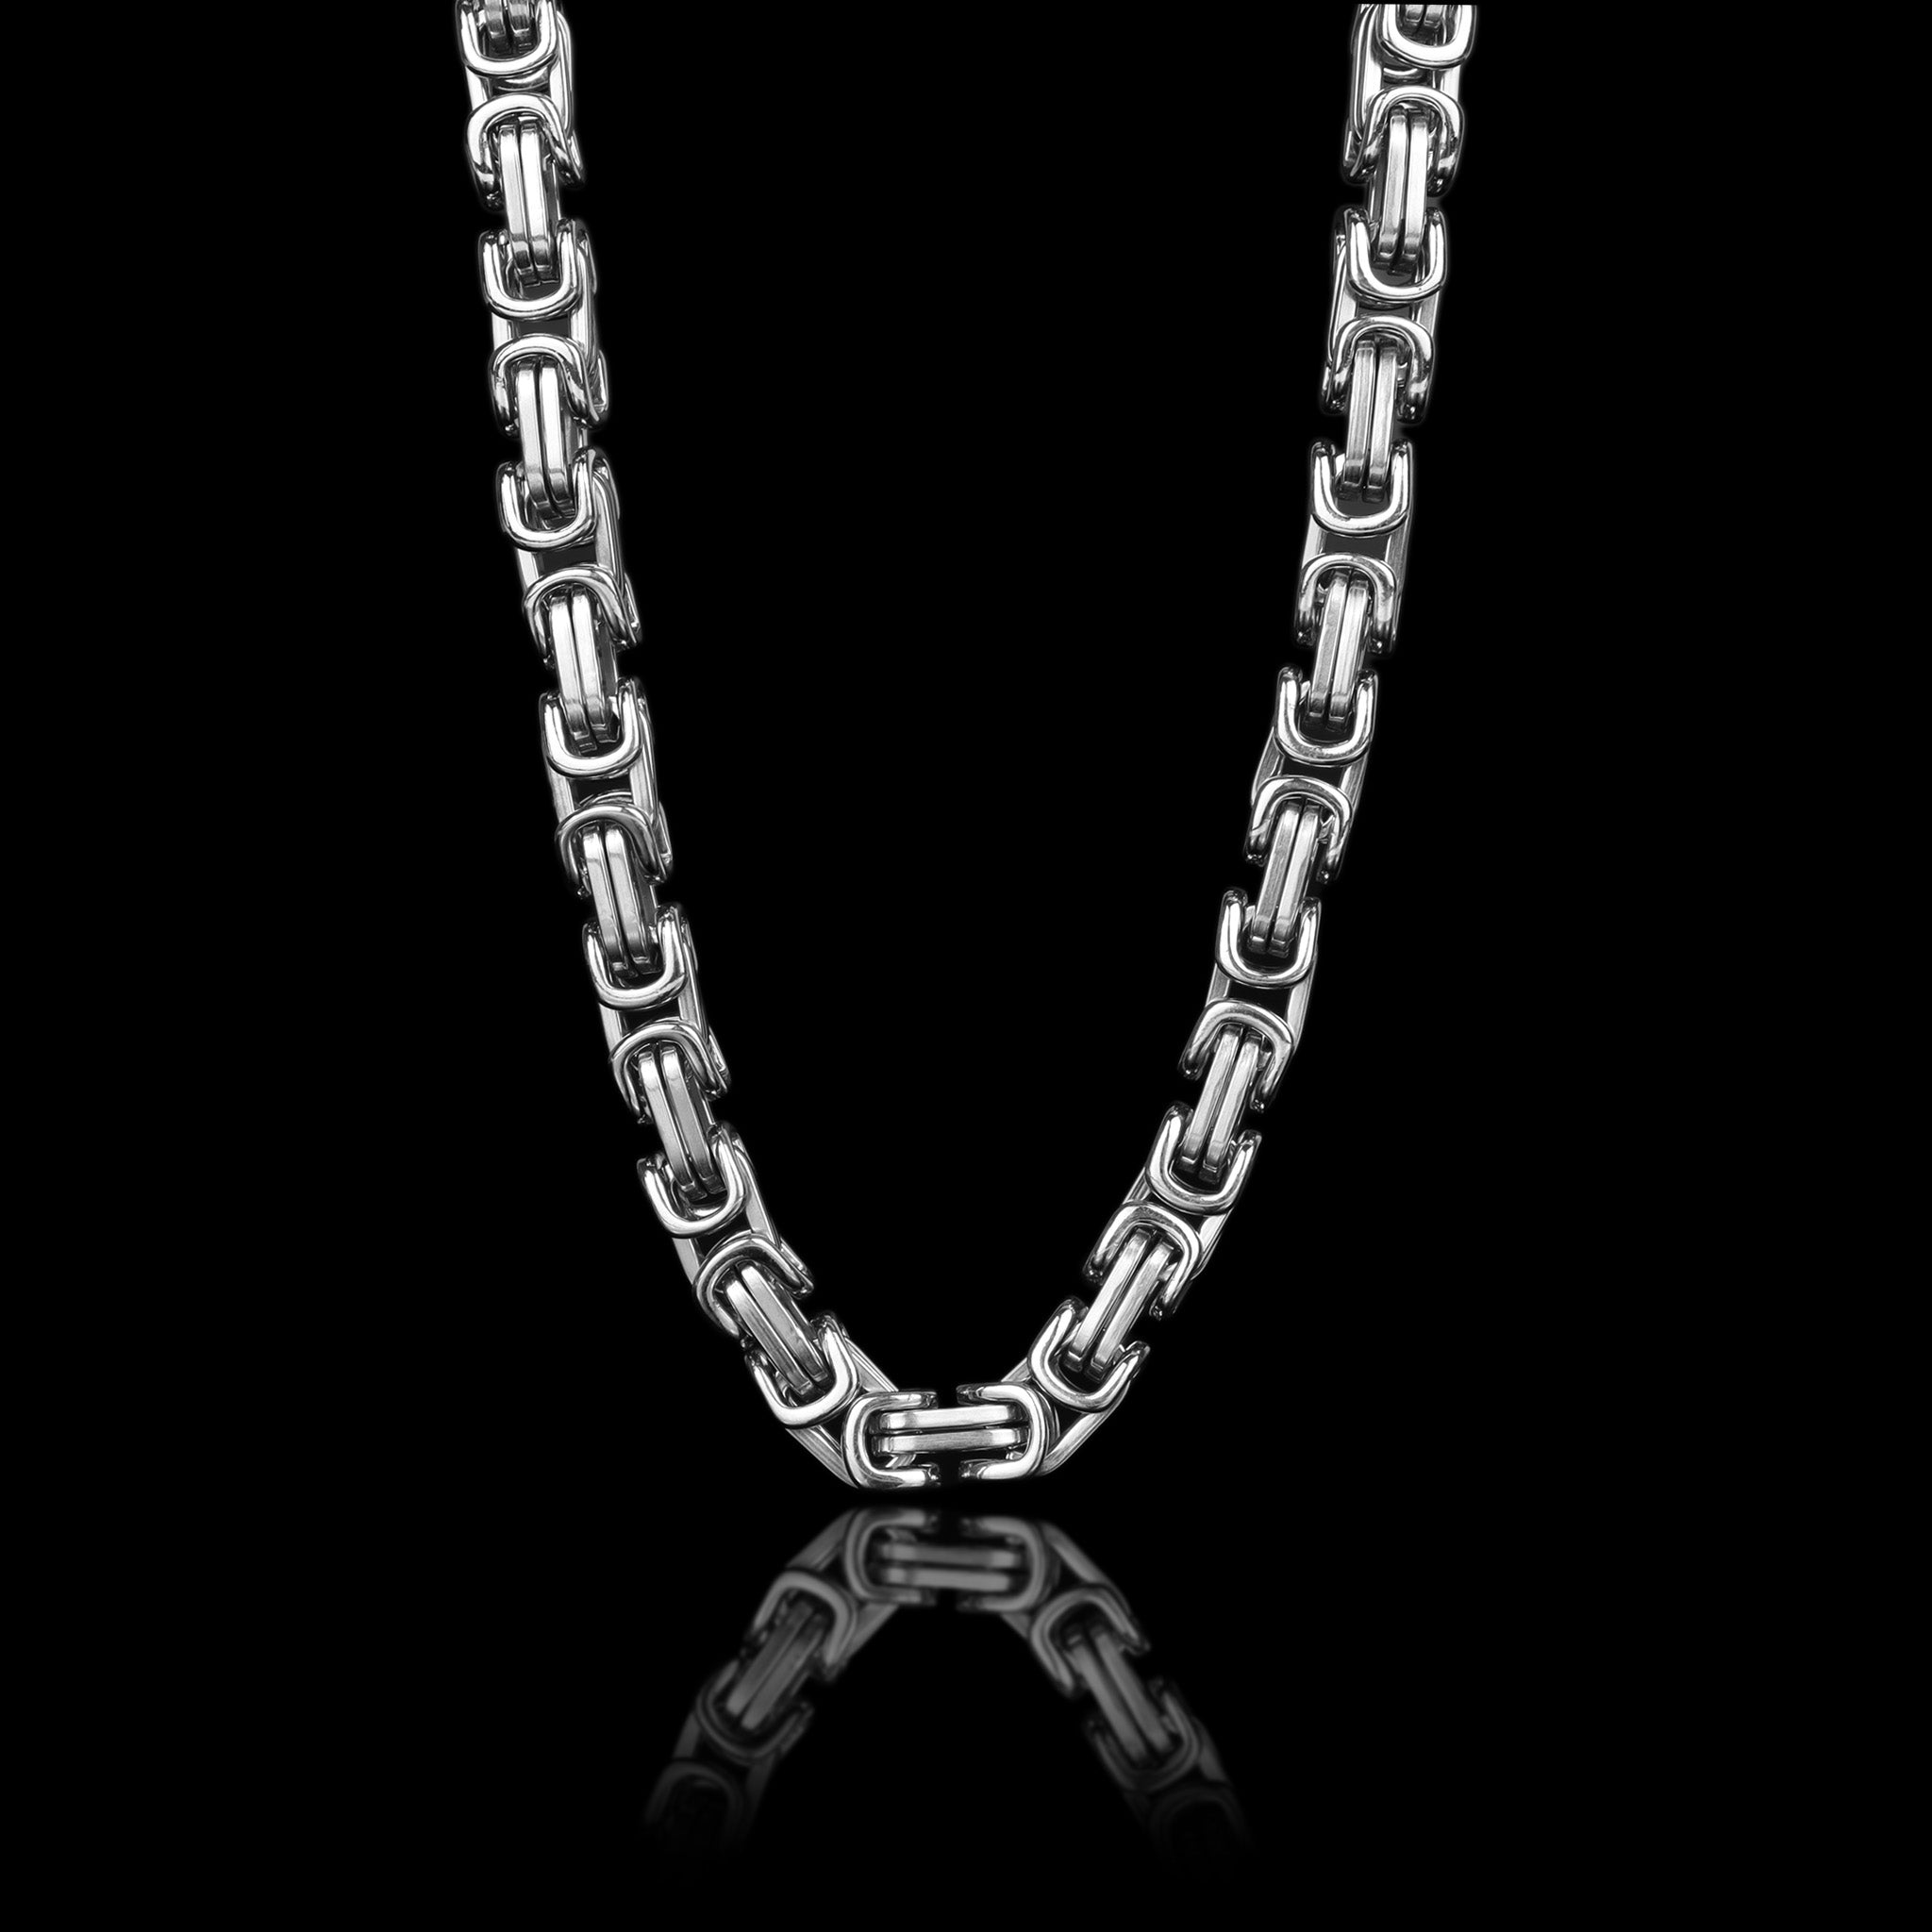 Necklace | Classic Rope Chain for Biker | Sanity Jewelry 4mm - 24